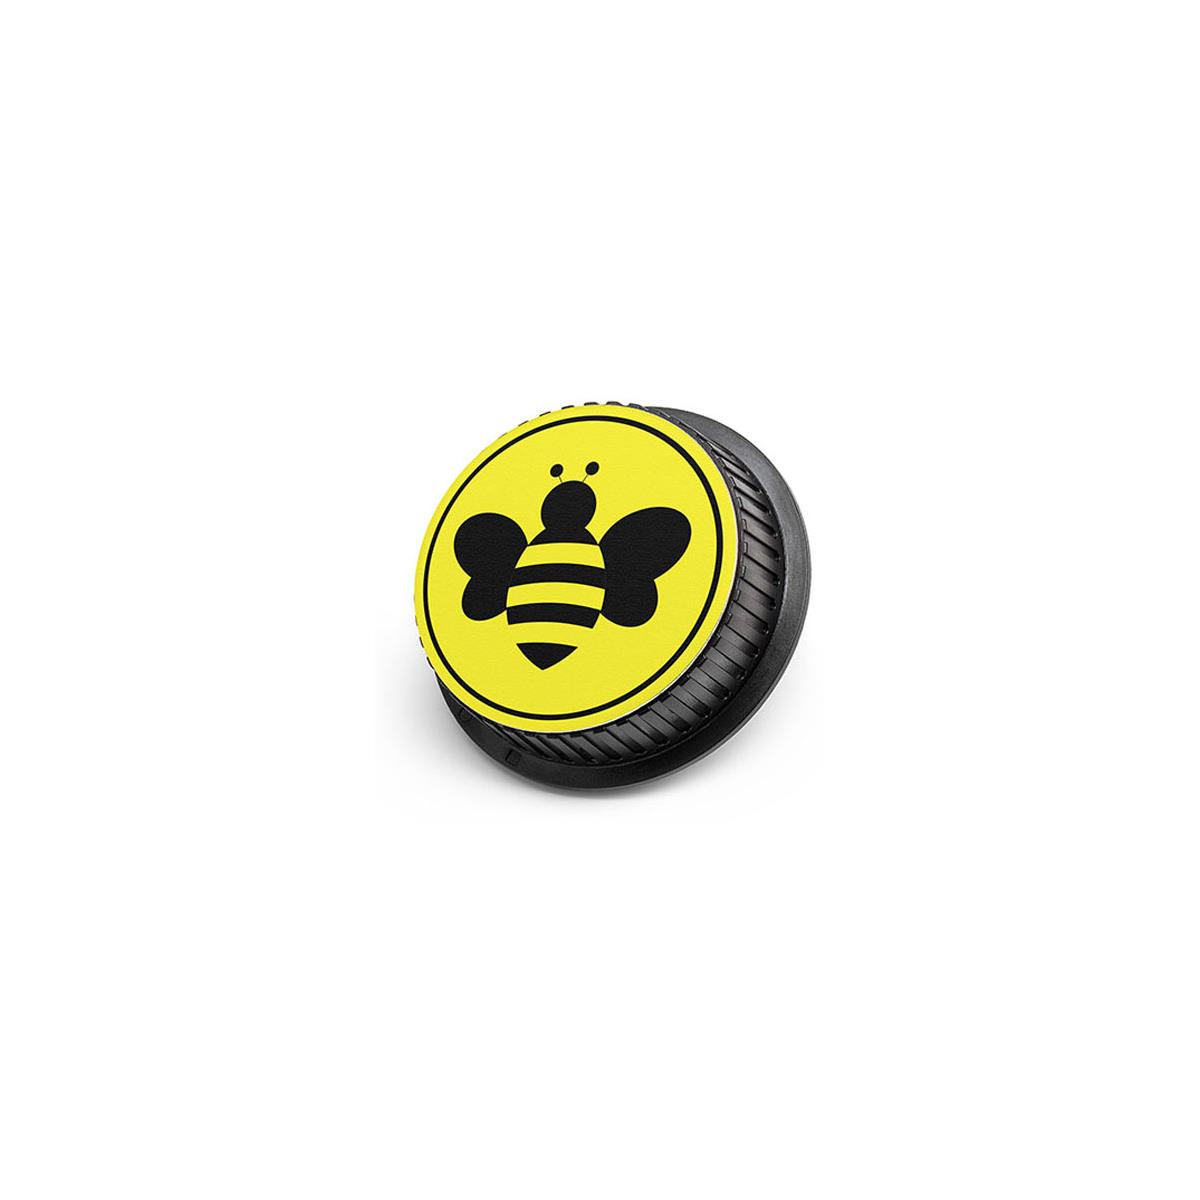 Image of LenzBuddy Rear Lens Cap for Canon - with Bumble Bee Icon (Yellow)